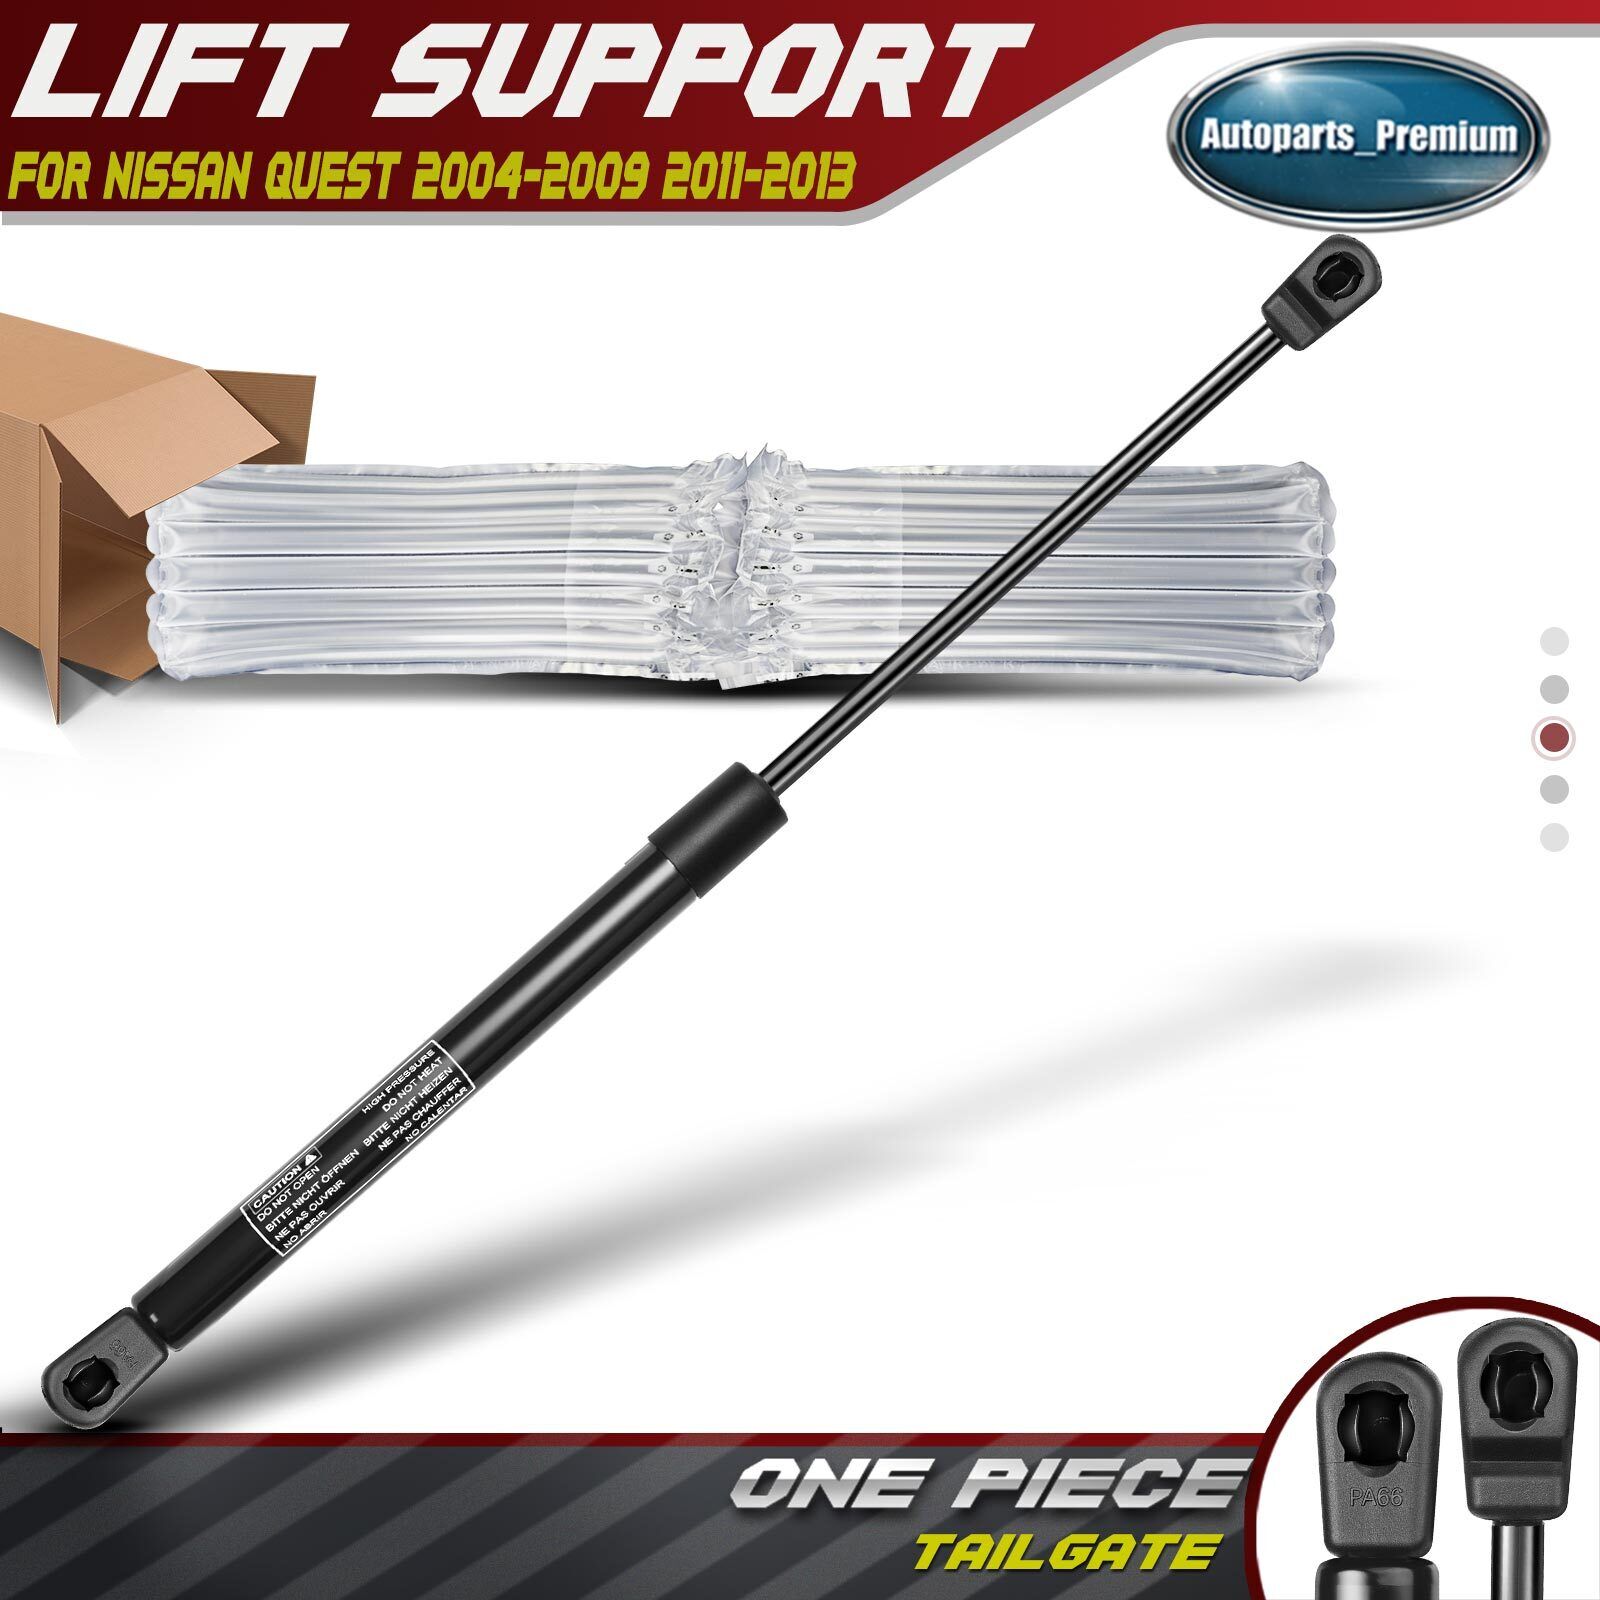 2x Rear Tailgate Hatch Lift Supports Struts for Nissan Quest 2004-2009 2011-2013